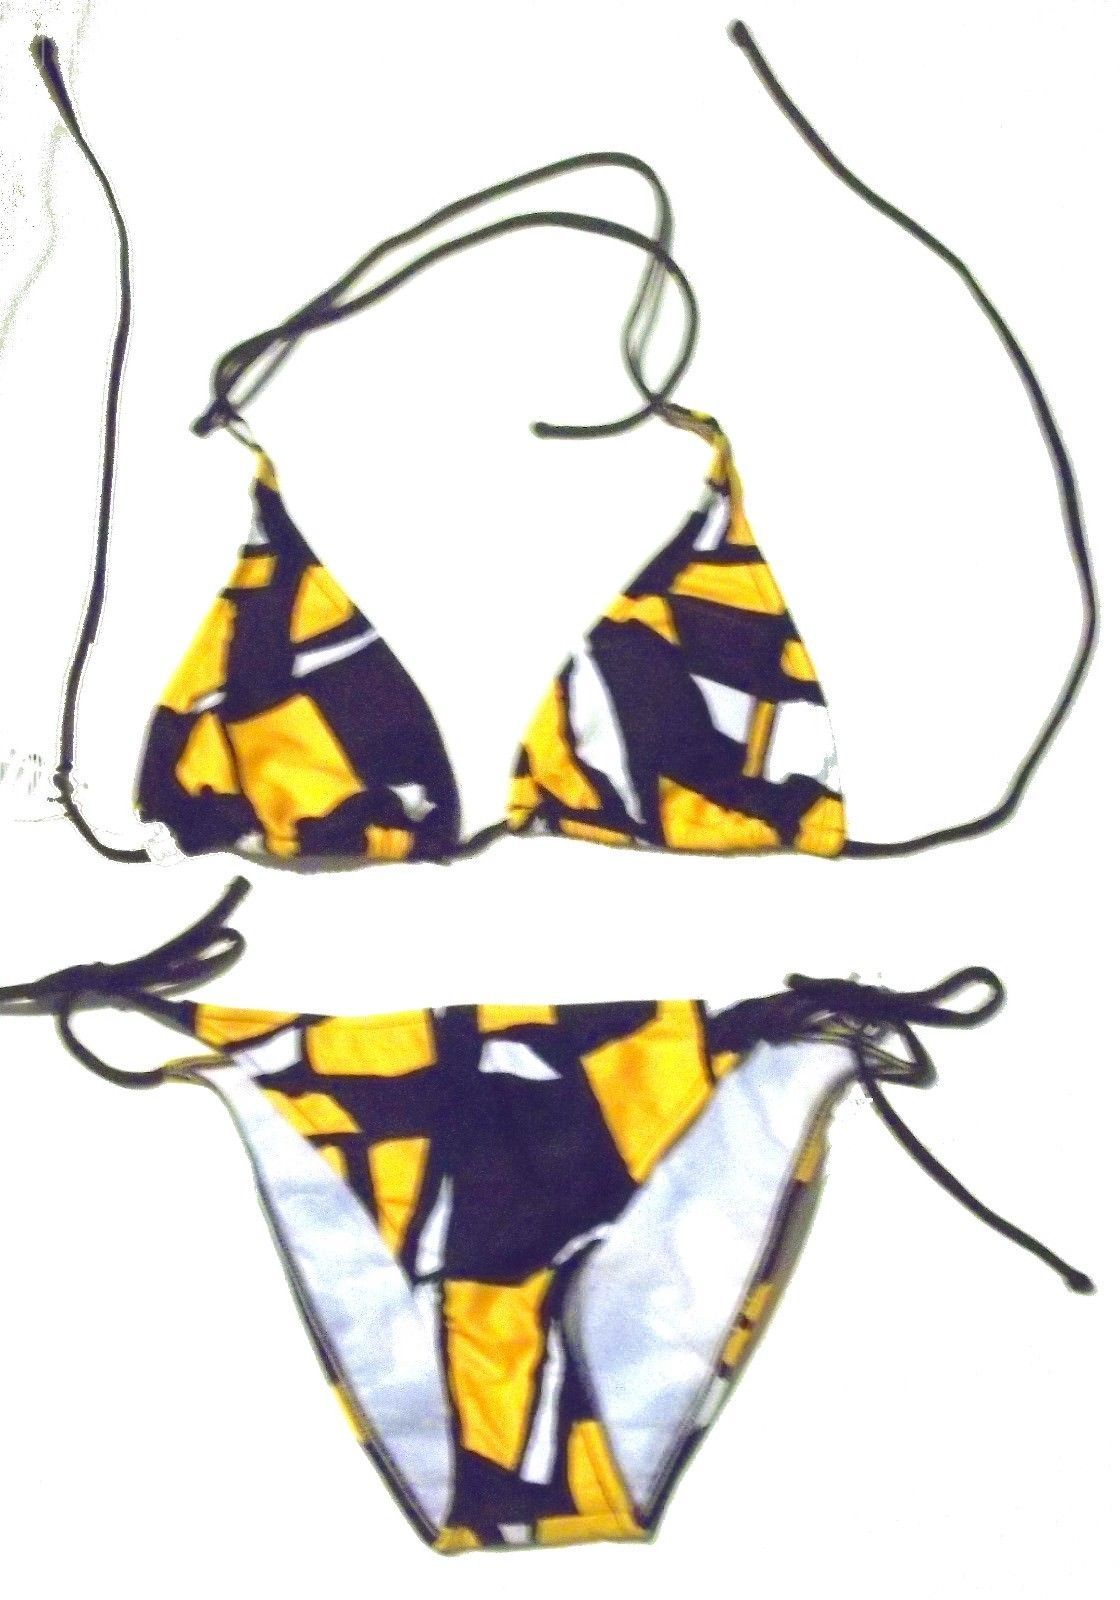 Primary image for Sunsets Picasso Yellow & Black Halter Bikini Swimsuit Size Small NWT$96